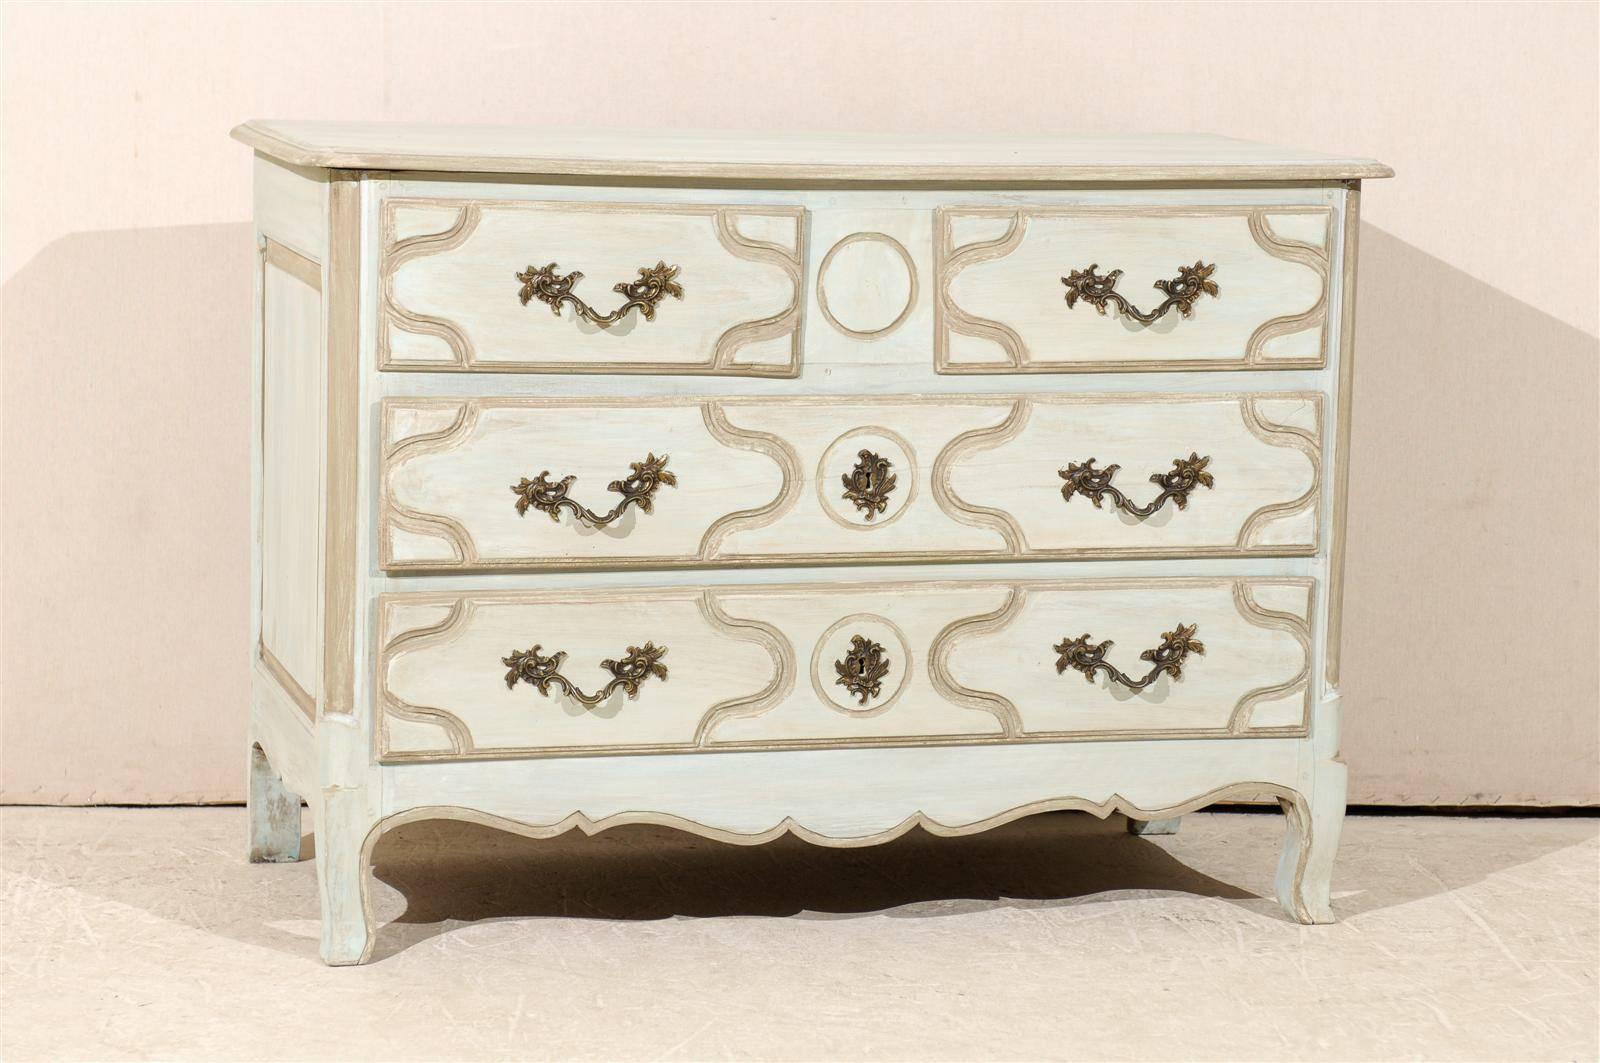 A French 1920s four-drawer painted wood chest with patterned drawers and scalloped skirt. This French four-drawer chest sits on cute cabriole feet. This piece is painted a light color with some darker neutral grey accents throughout. This French